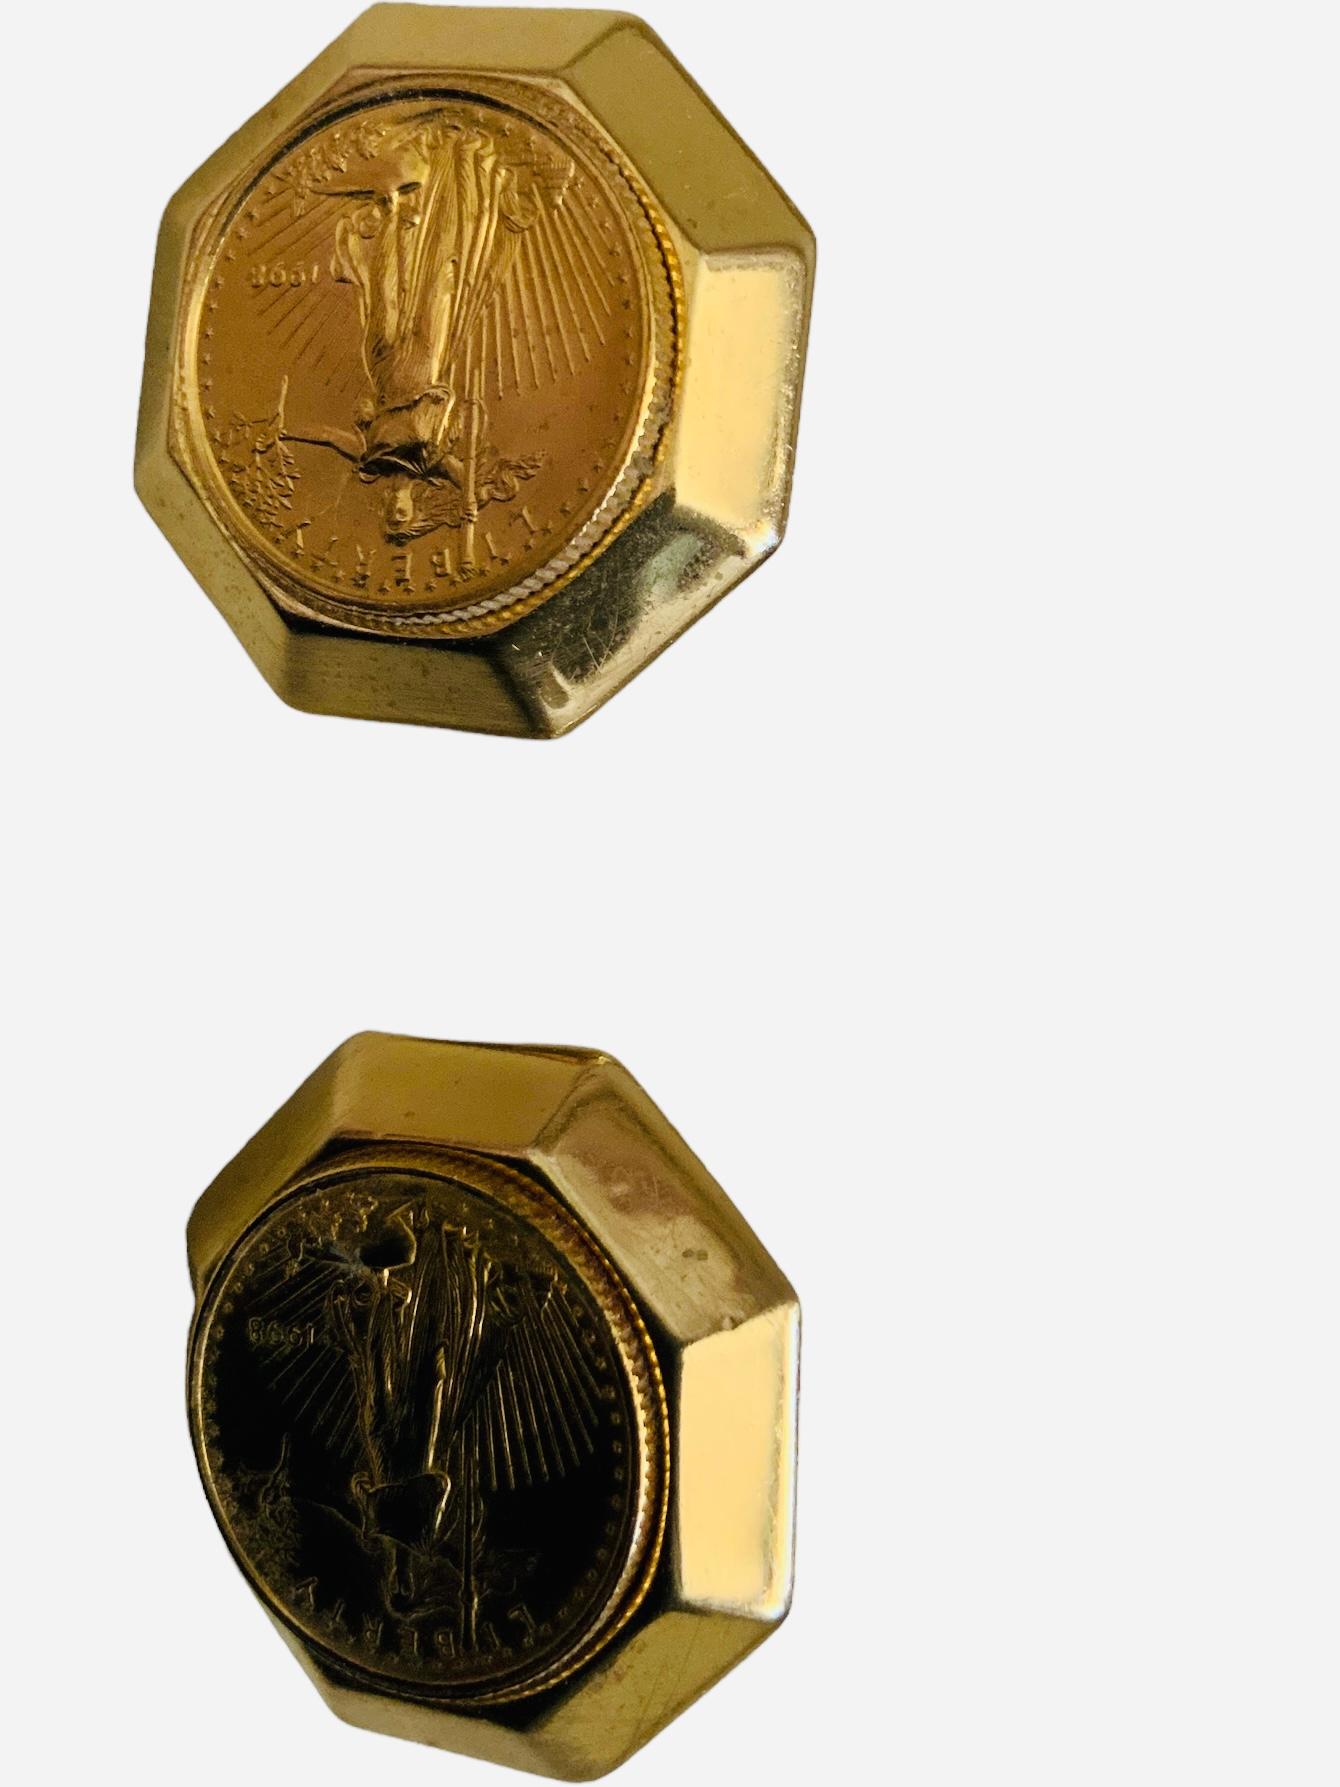 This is a Gold Buillon Coins set mounted in a ring, pair of earrings and pendant. The 14K gold octagonal design ring contains an original United States of America 1/10 oz fine gold, five dollars 1997 and its weight is 14.5 grams. Its size is 8.5.